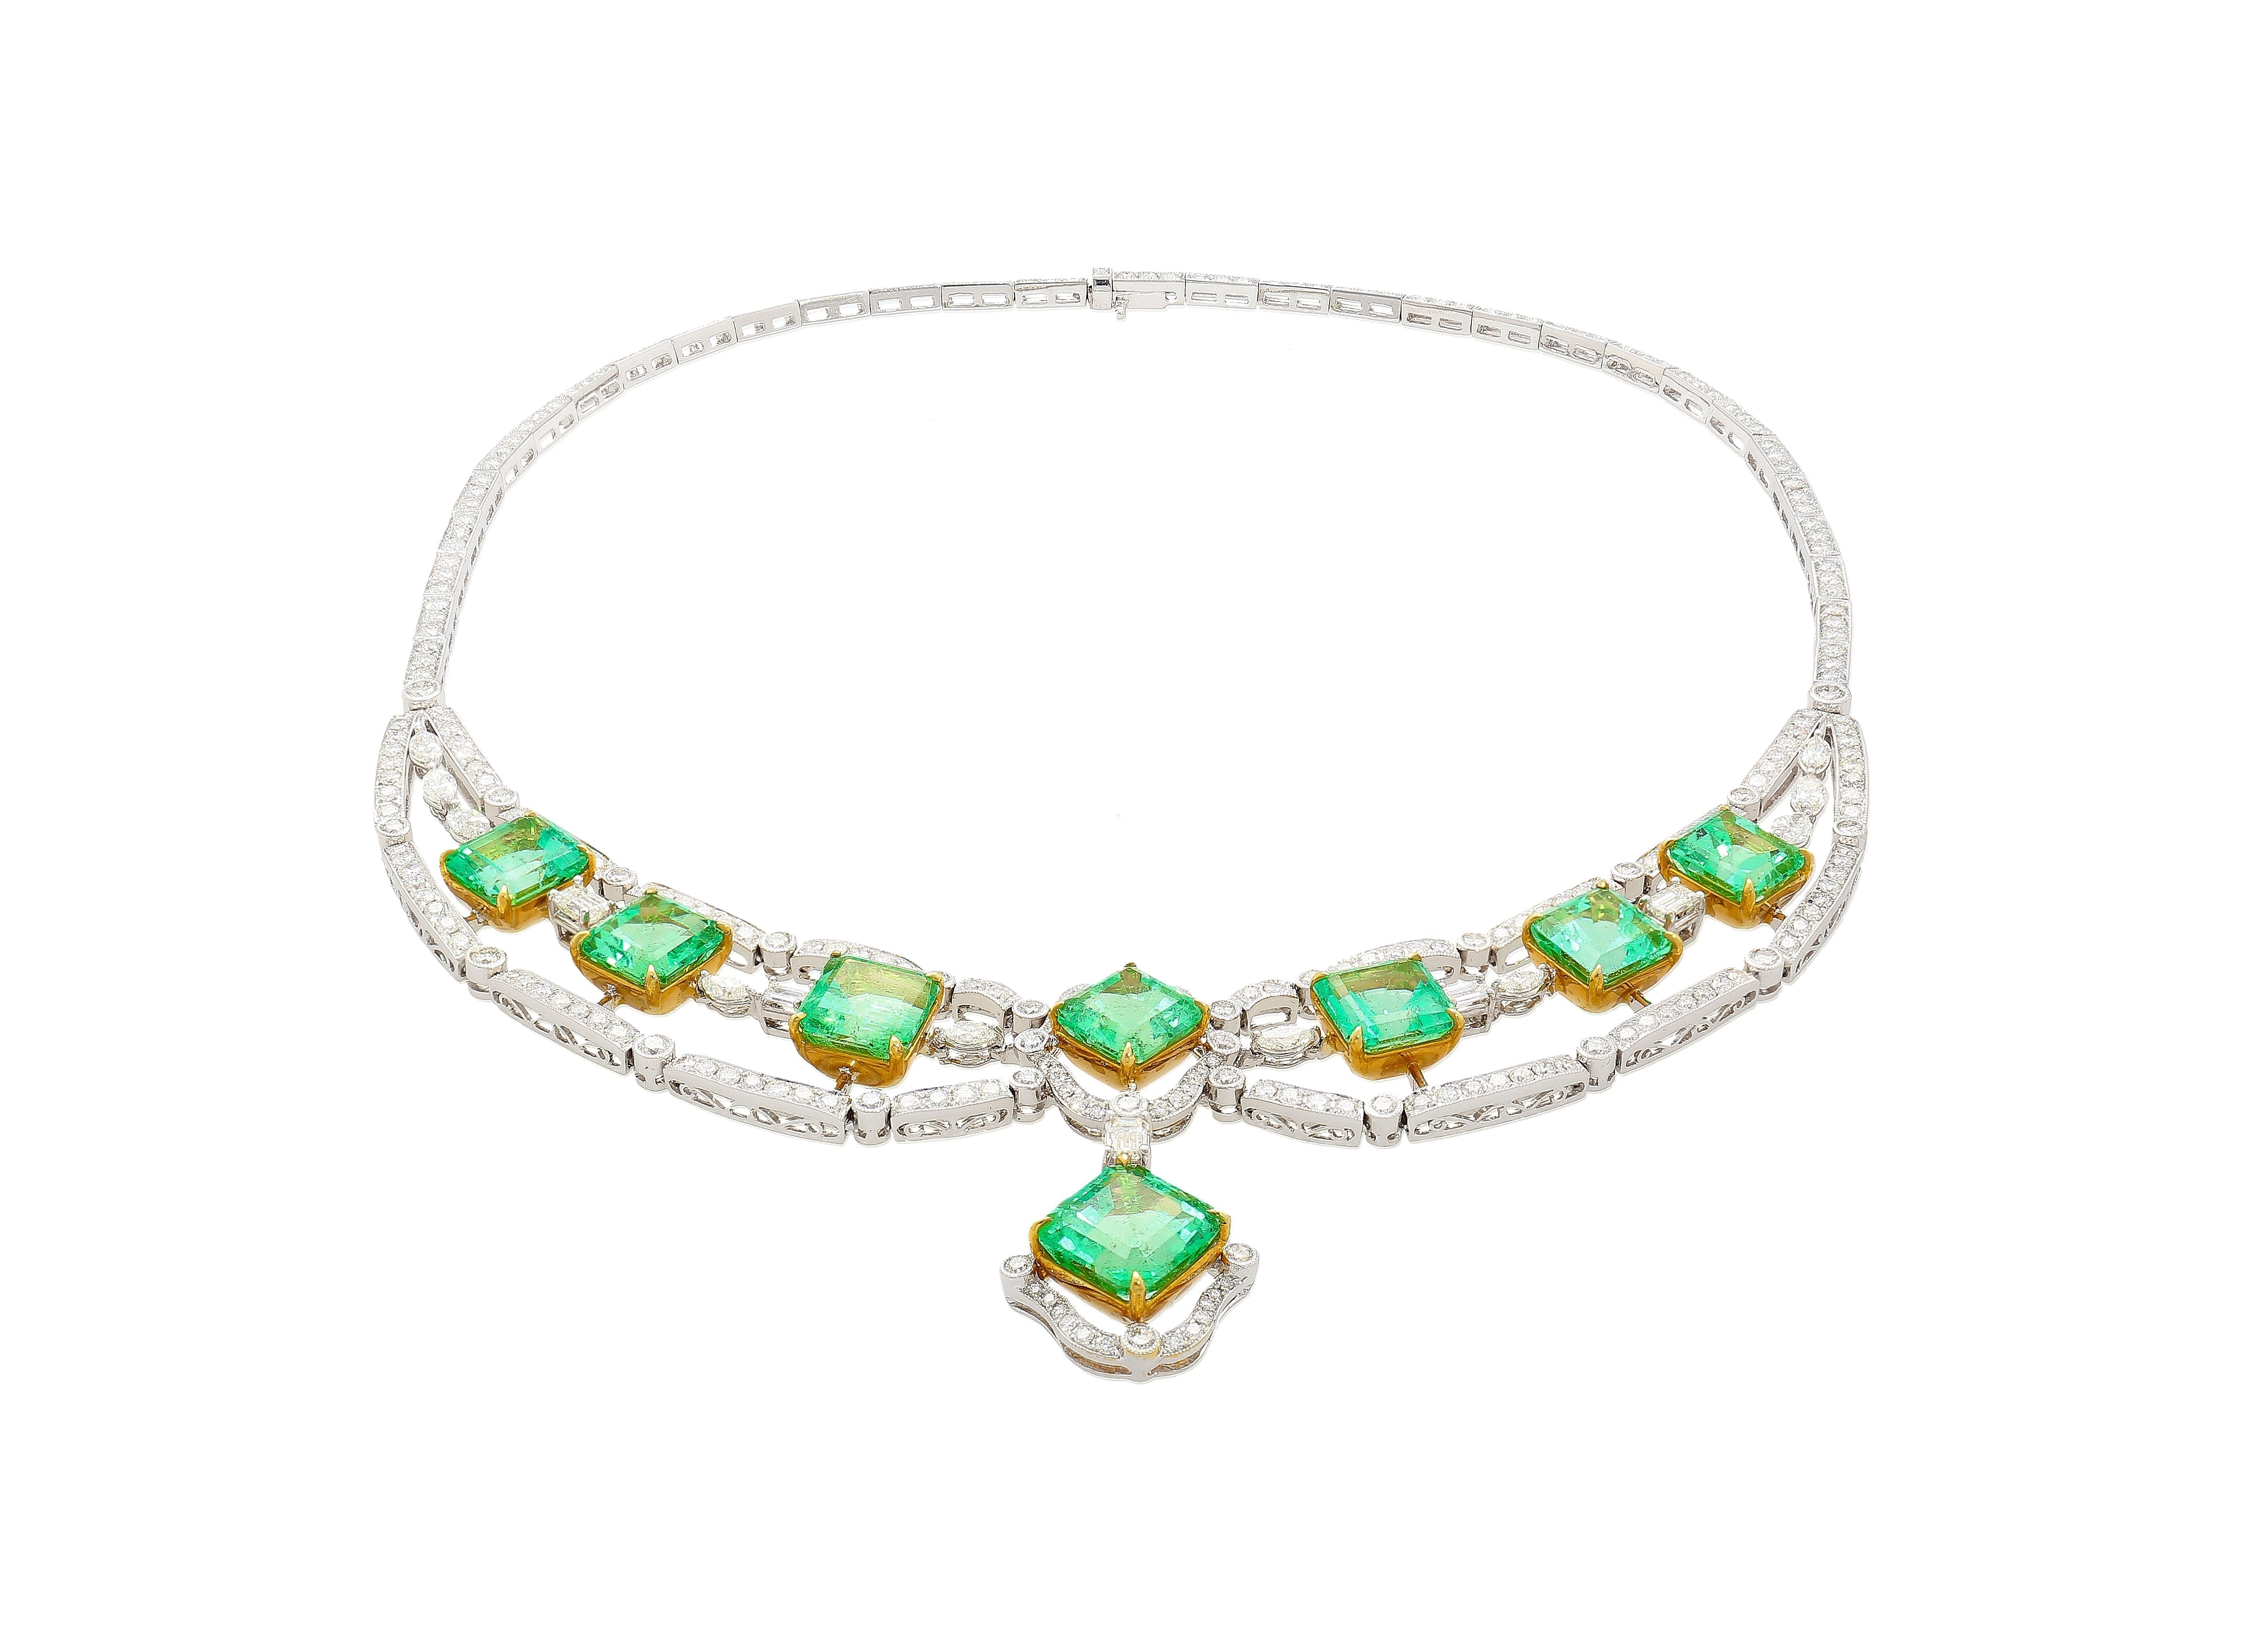 GIA-Certified-6_21-Carat-Emerald-and-30_38-Carat-Emerald-With-9_86-Carat-Diamonds-Chandelier-Necklace-Necklace-2.jpg